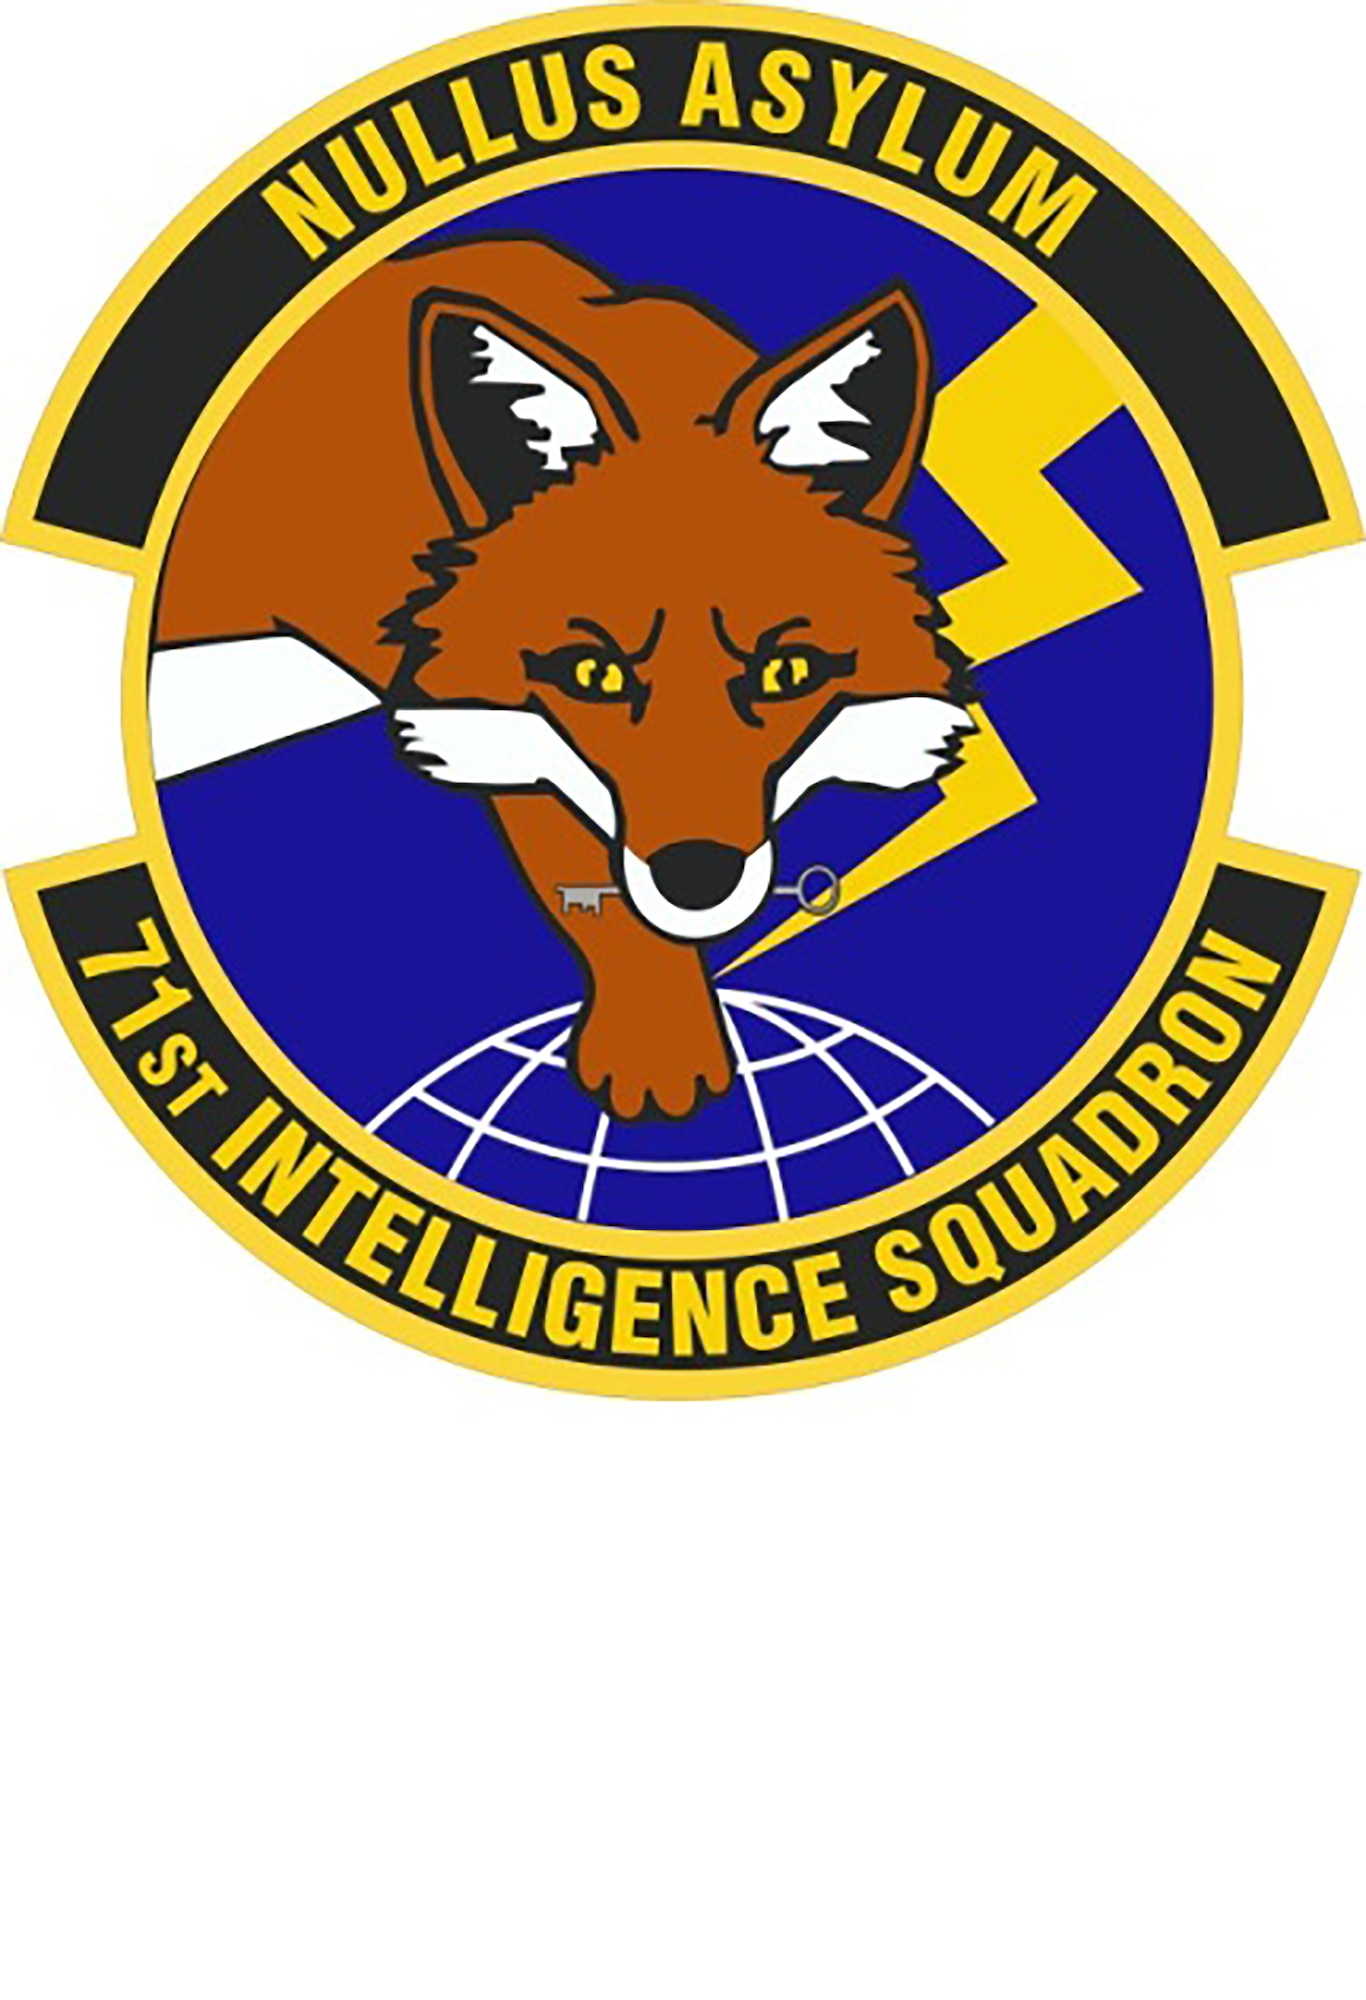 WRIGHT-PATTERSON AIR FORCE BASE, Ohio – The 71st Intelligence Squadron located here recently reached its full operational capability becoming a fully operational capable unit.